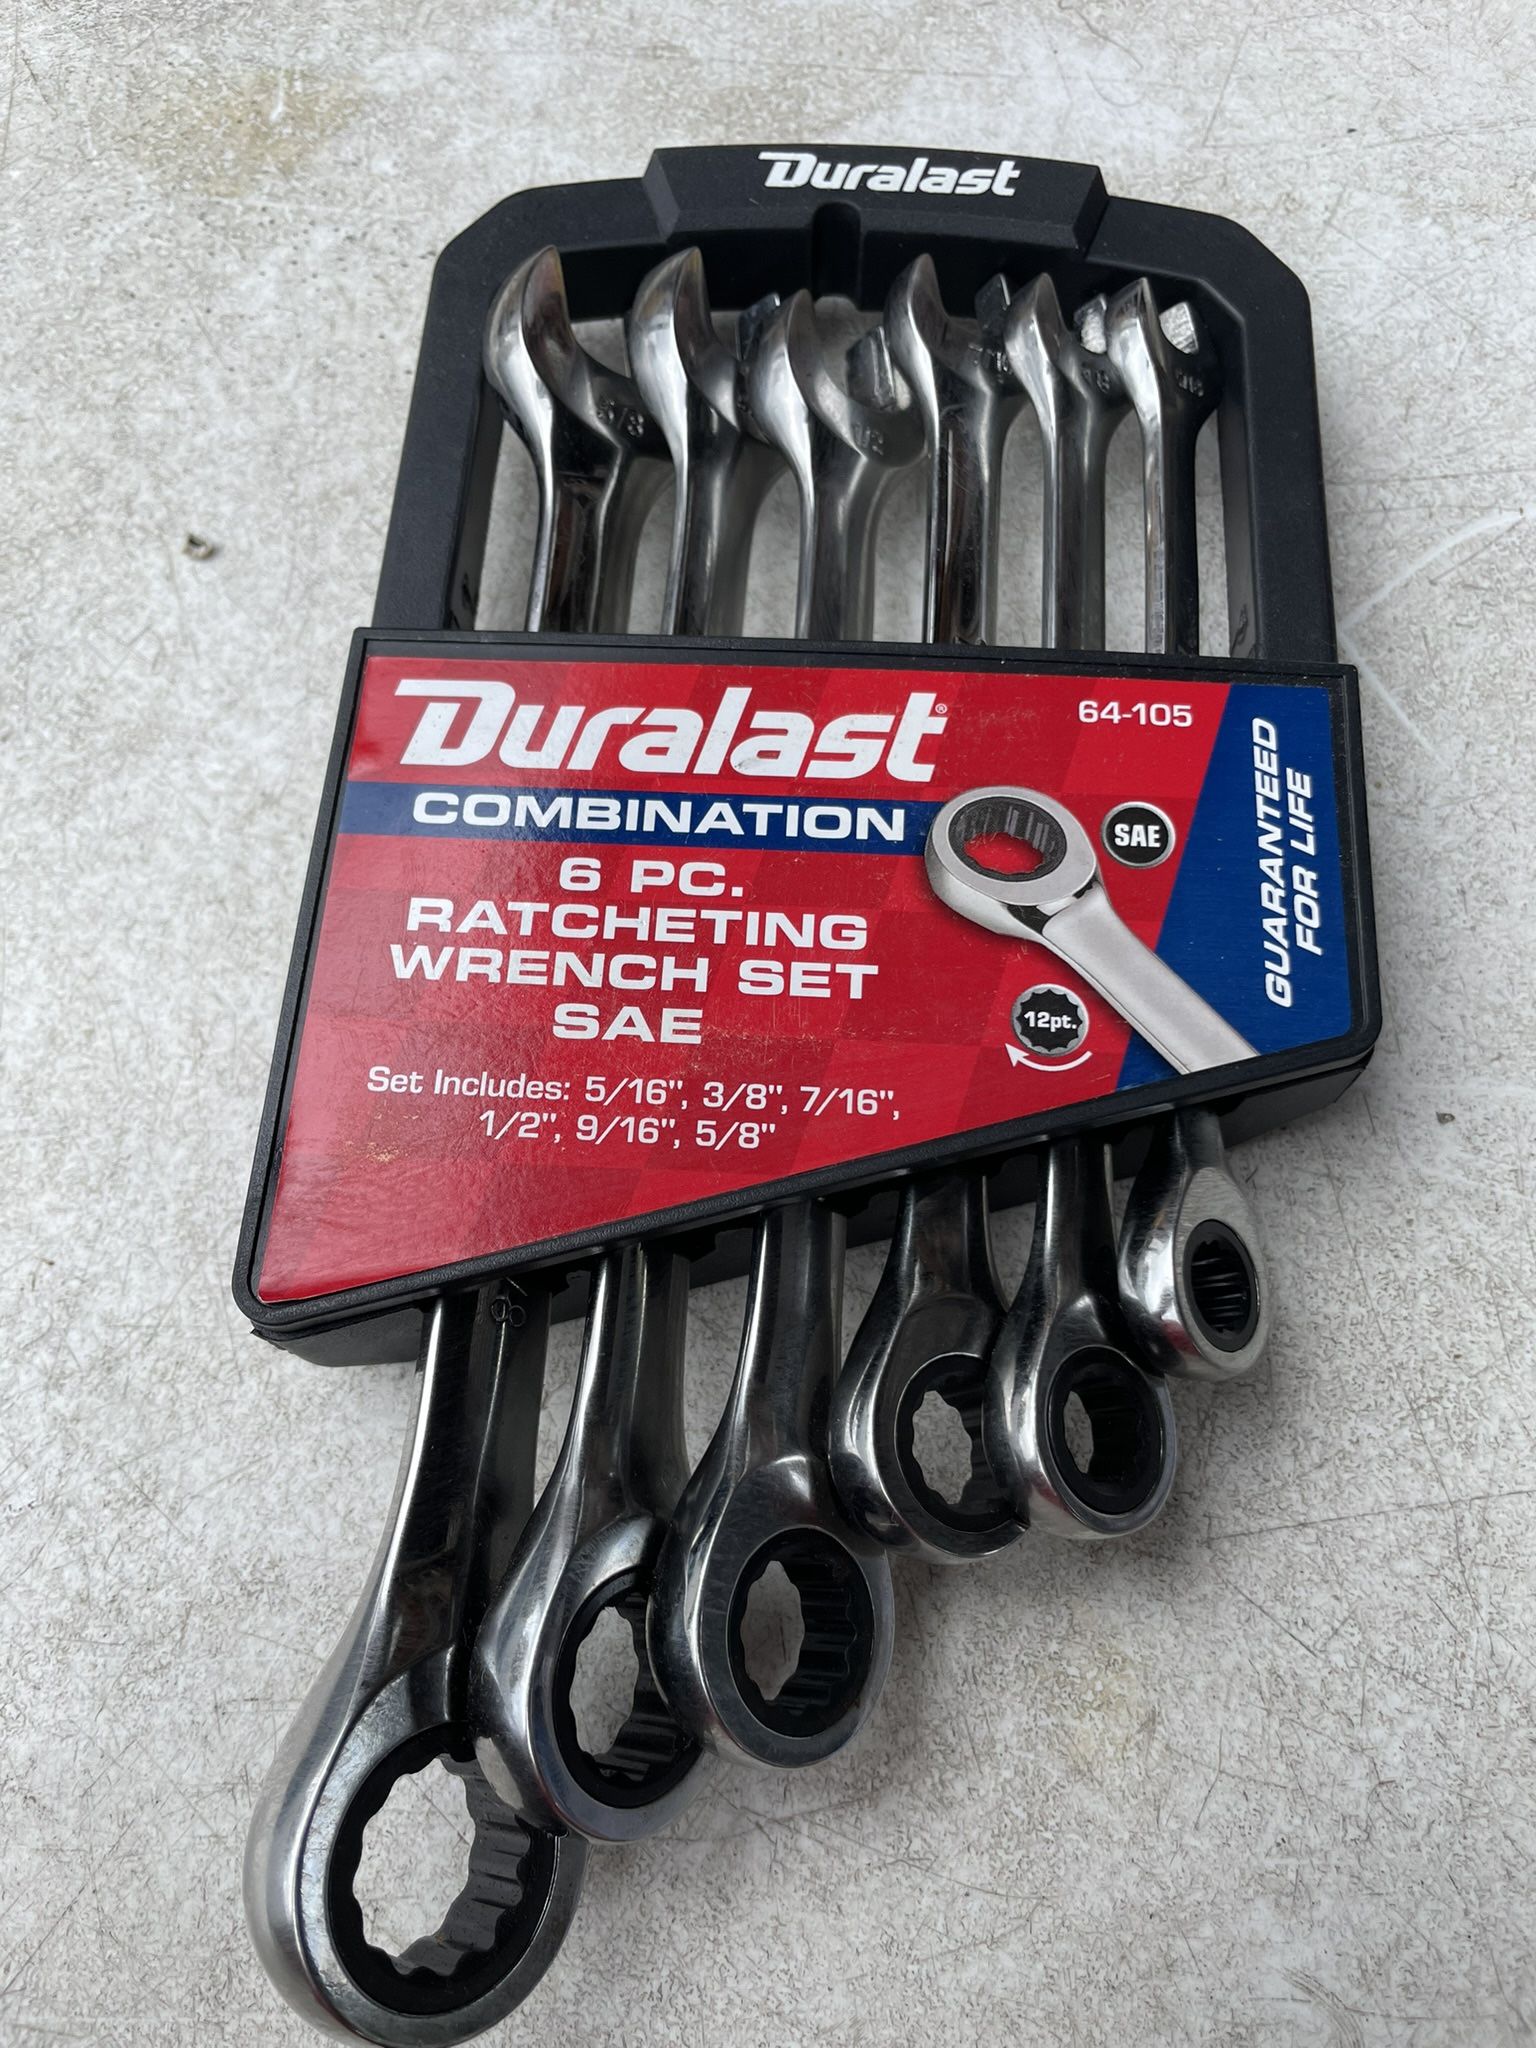 Duralast Ratcheting Wrench Set 